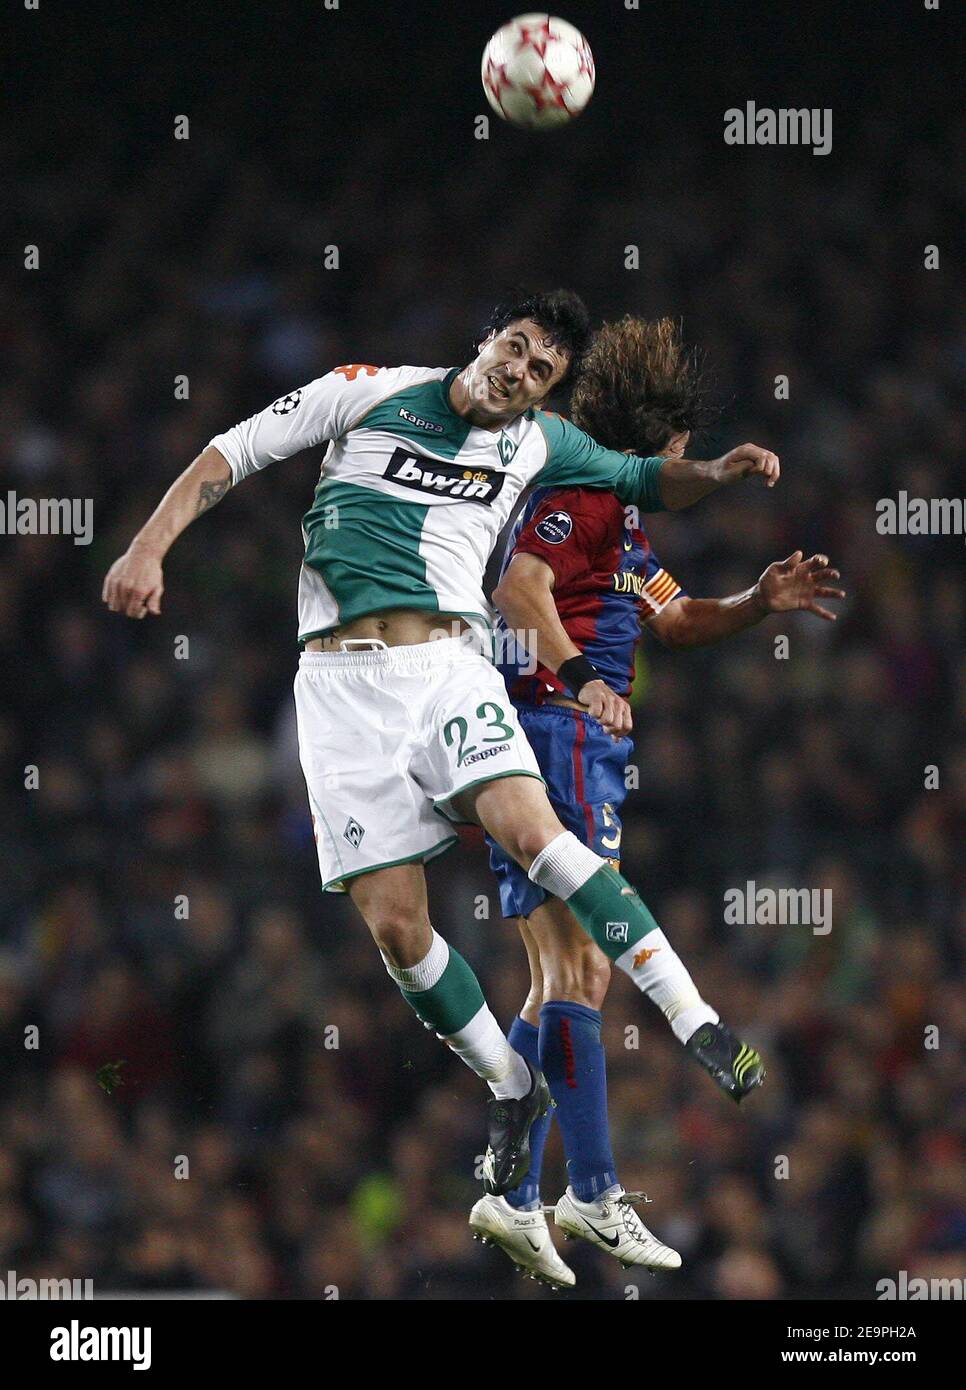 Werder Bremen's Hugo Almeida battle for the ball during the UEFA Champions League, Group A, FC Barcelona vs Werder Bremen at Camp Nou, in Barcelona, Spain, on December 5, 2006. FC Barcelona won 2-0. Photo by Christian Liewig/ABACAPRESS.COM Stock Photo